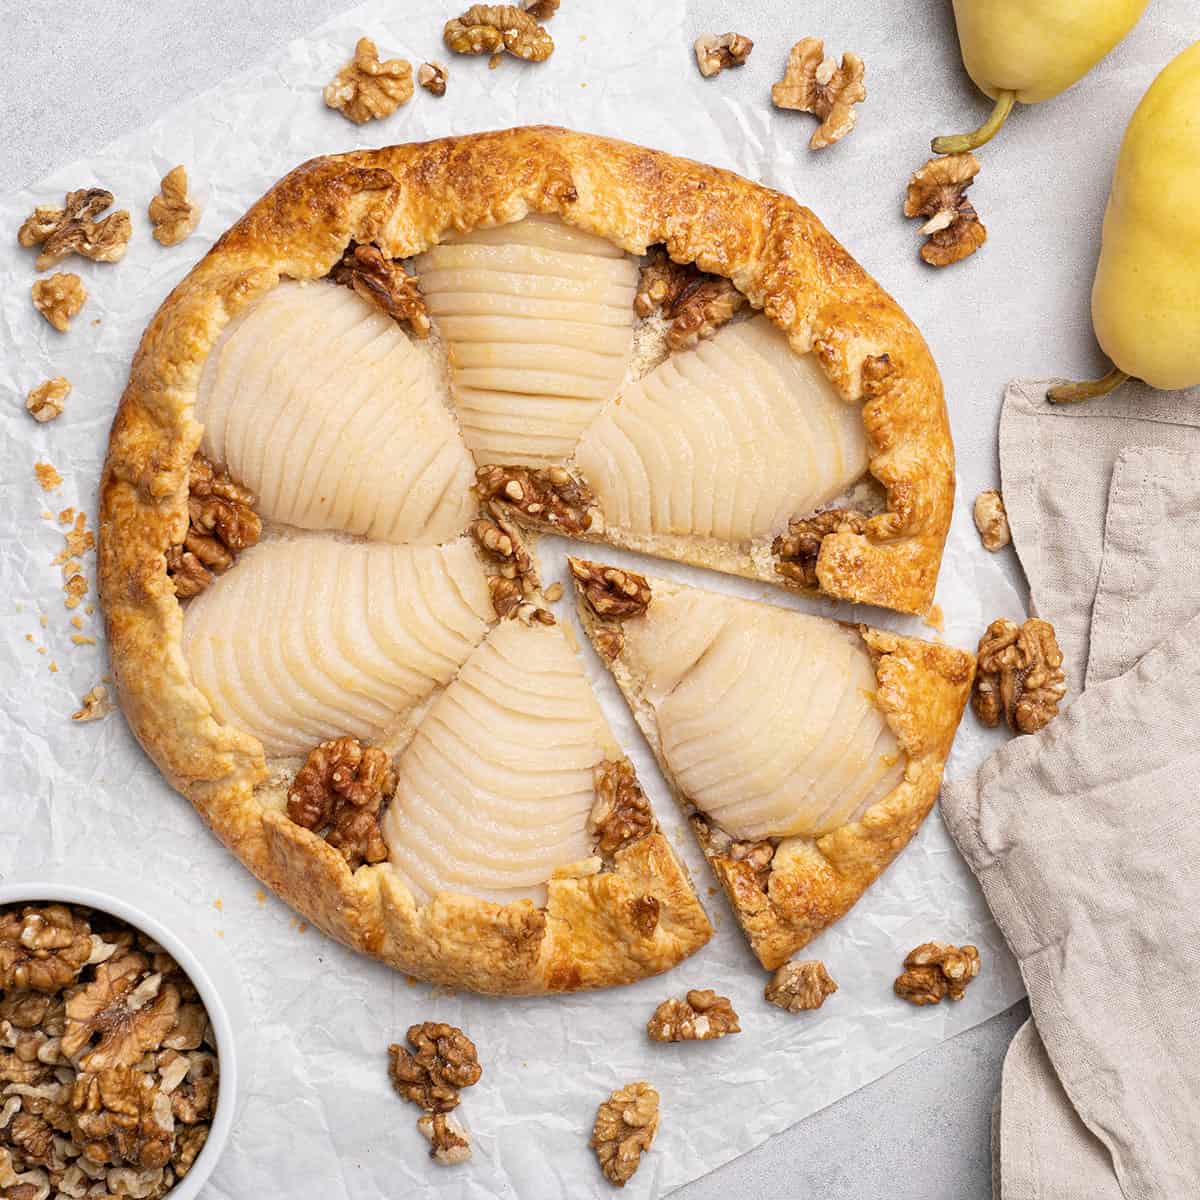 Pear galette decorated with walnuts.